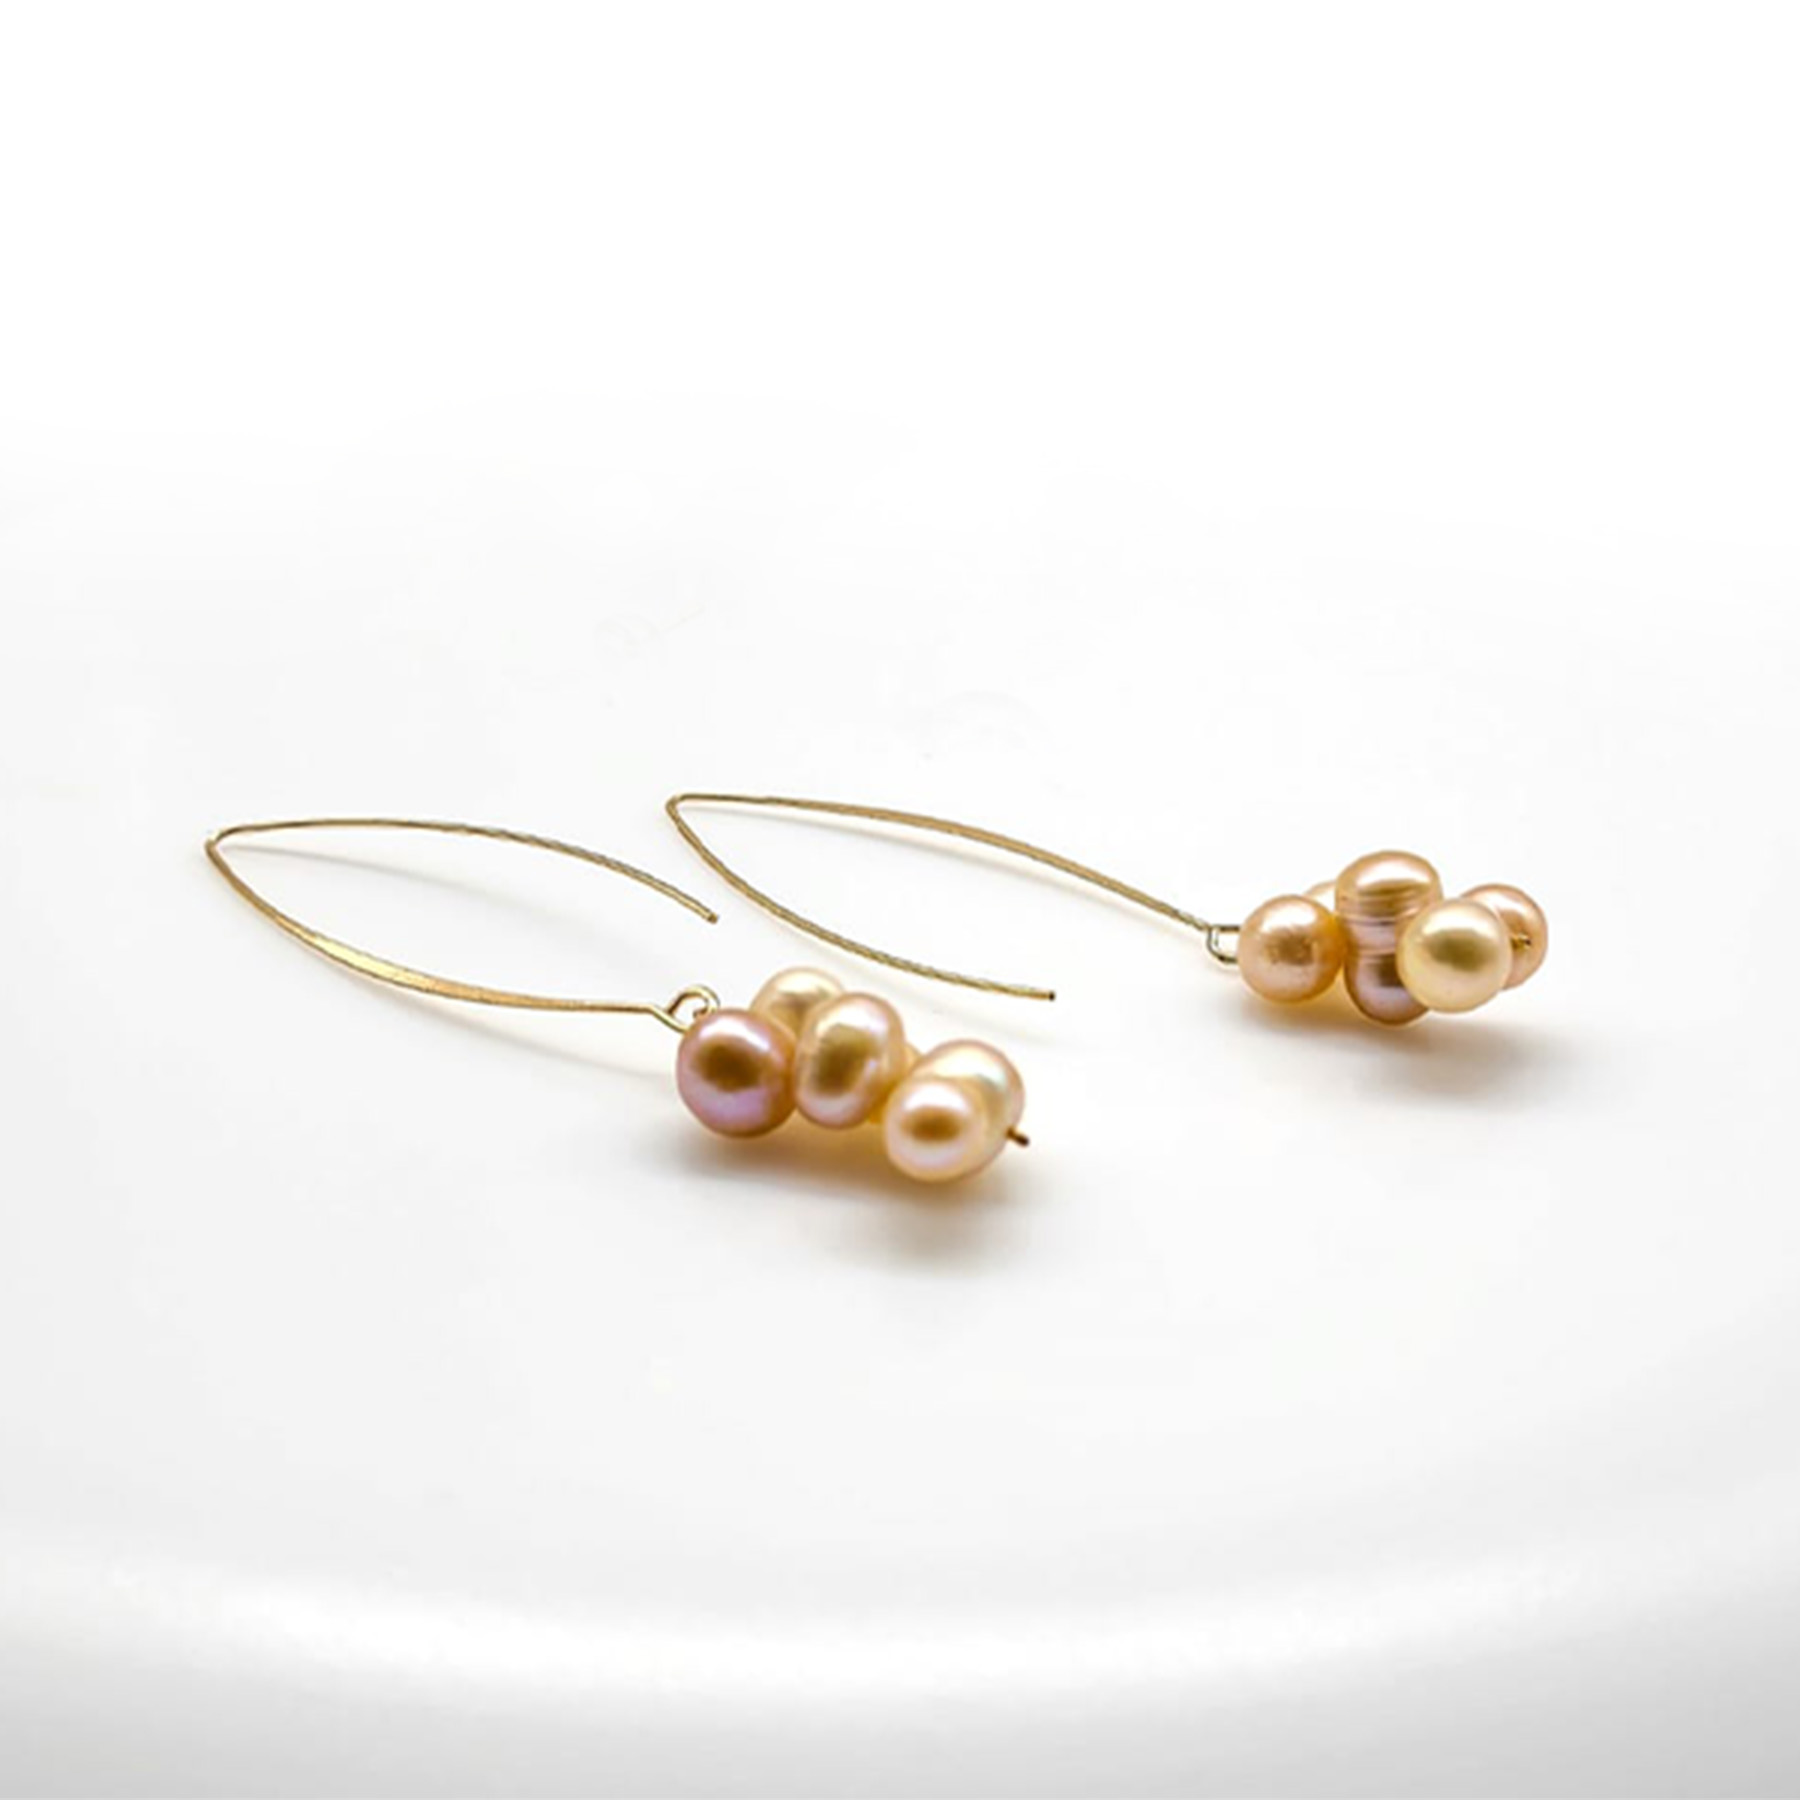 Chunky hoop drop earrings with fresh water peach pearl on stainless gold plated